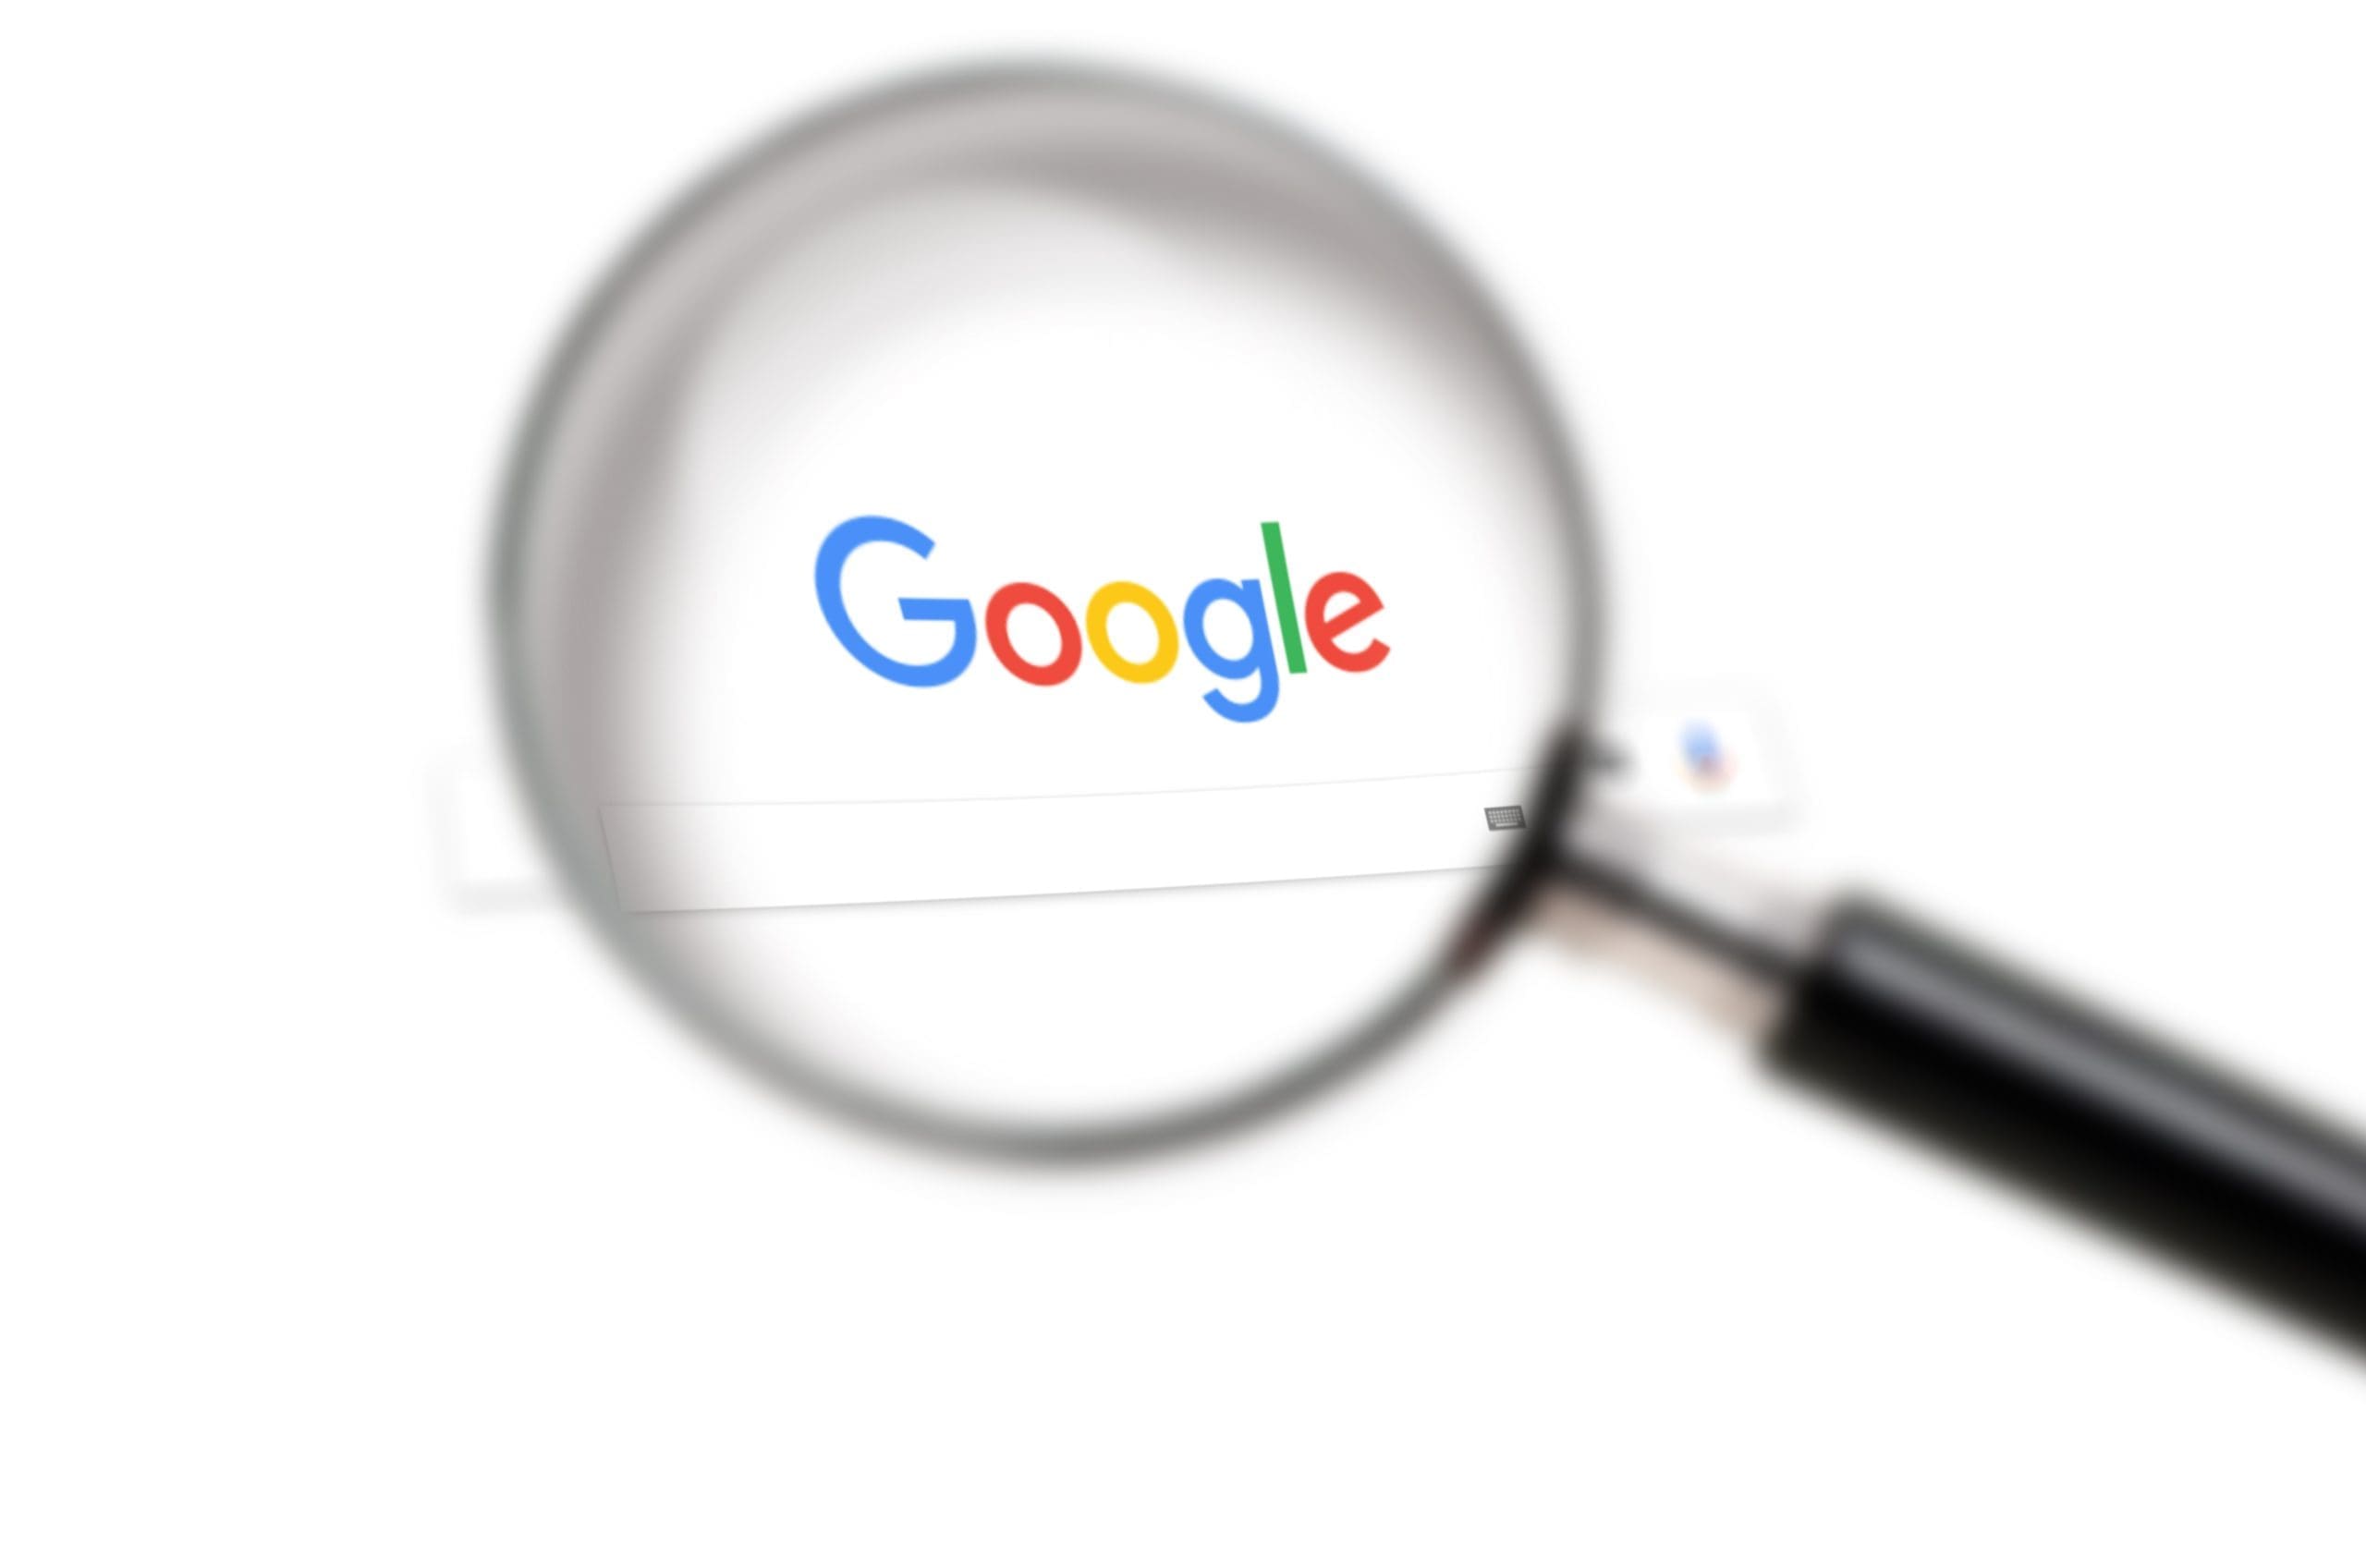 Google logo under a magnifying glass.